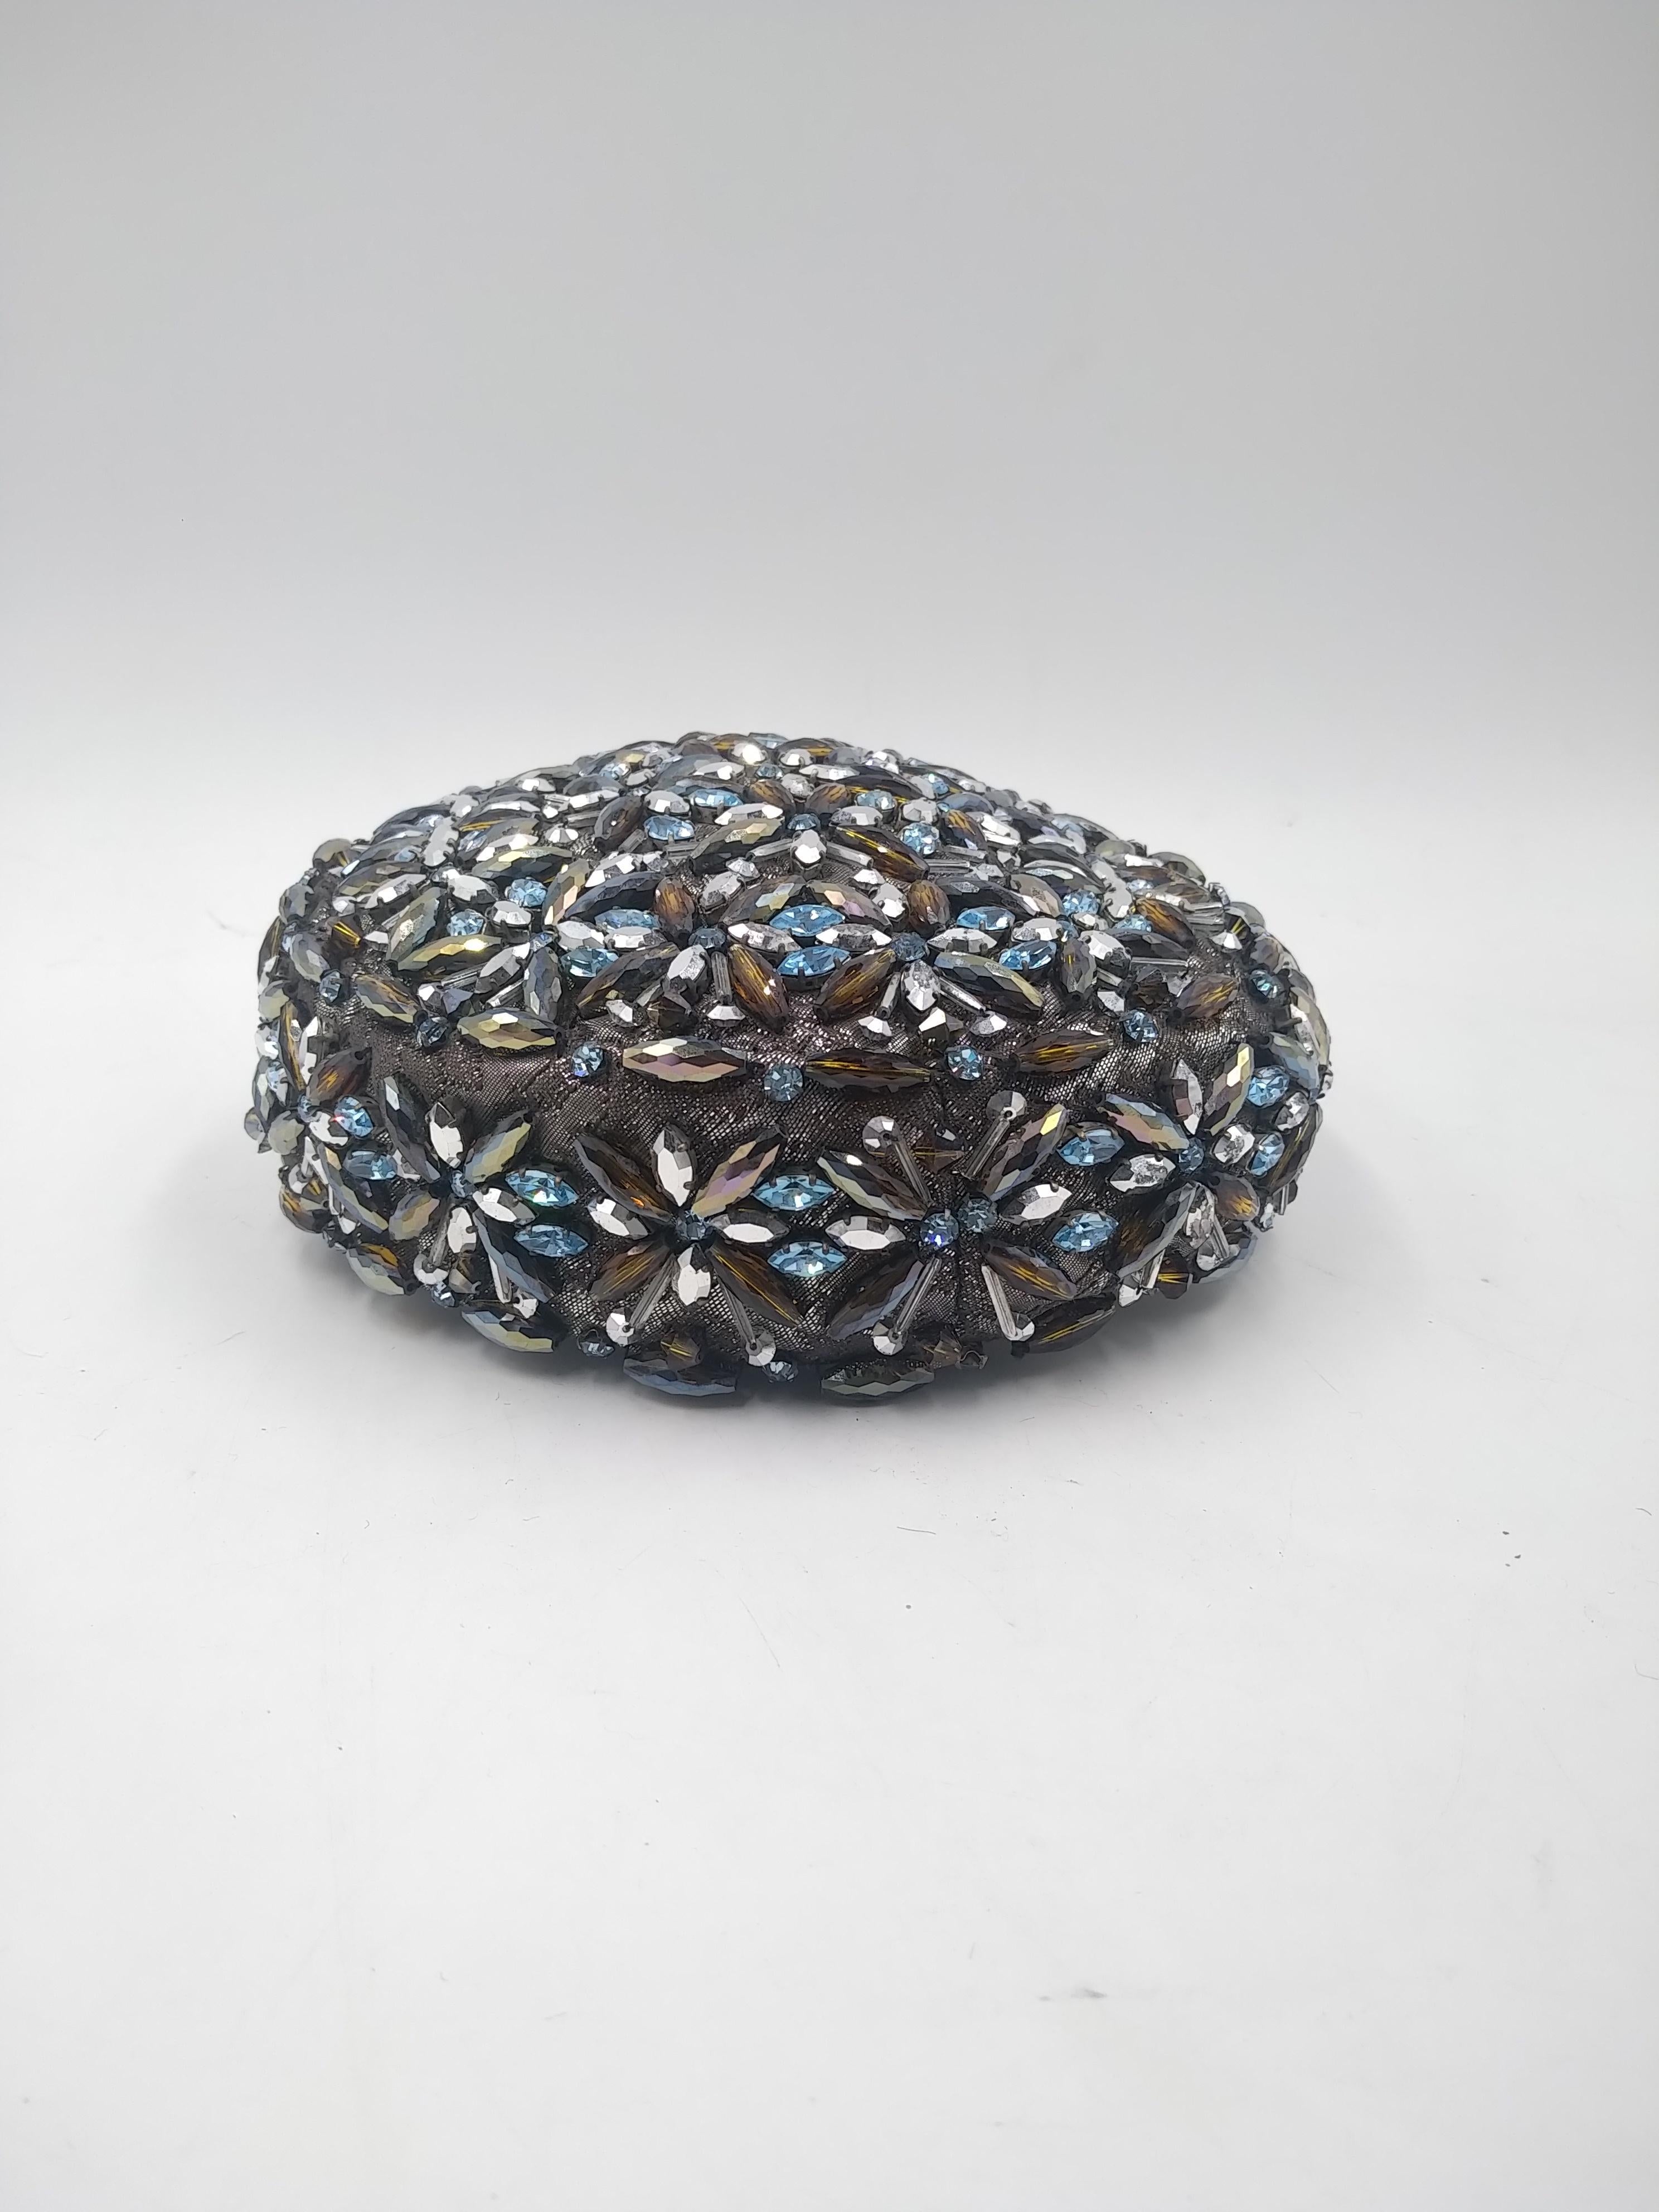 1950s Balenciaga Haute Couture Jewel Pillbox Hat
- 100% Authentic Balenciaga
- silver fabric covered with crystals that create a flower design
- comb to stop the hat on your hairstyle
- circumference 44 cm